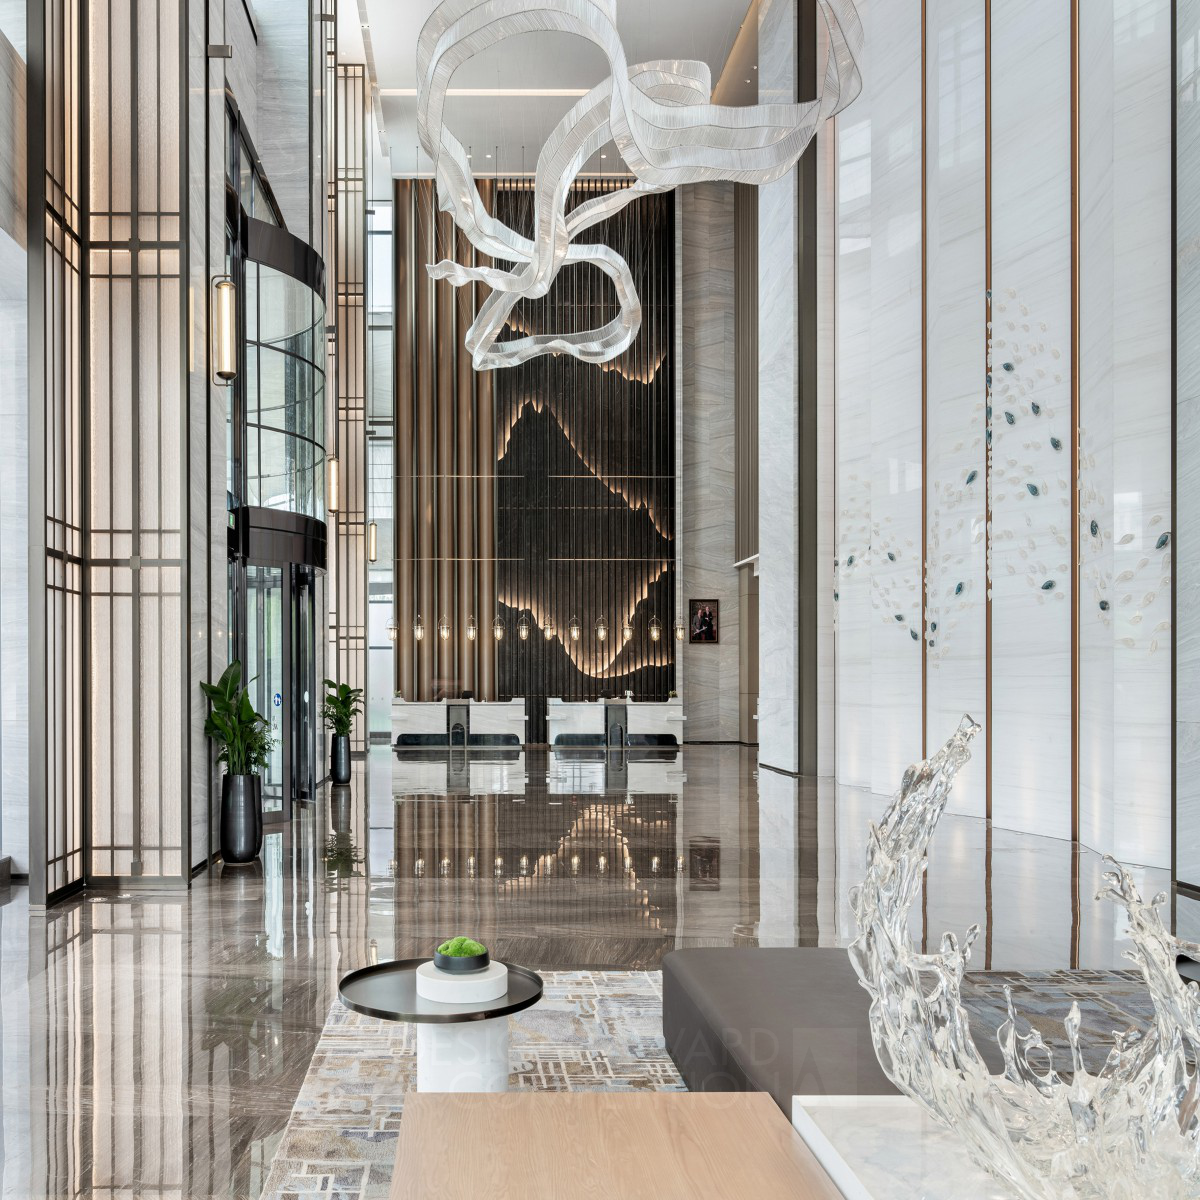 Zhangjiagang Marriott Hotel: A Fusion of Oriental Aesthetics and Modern Luxury